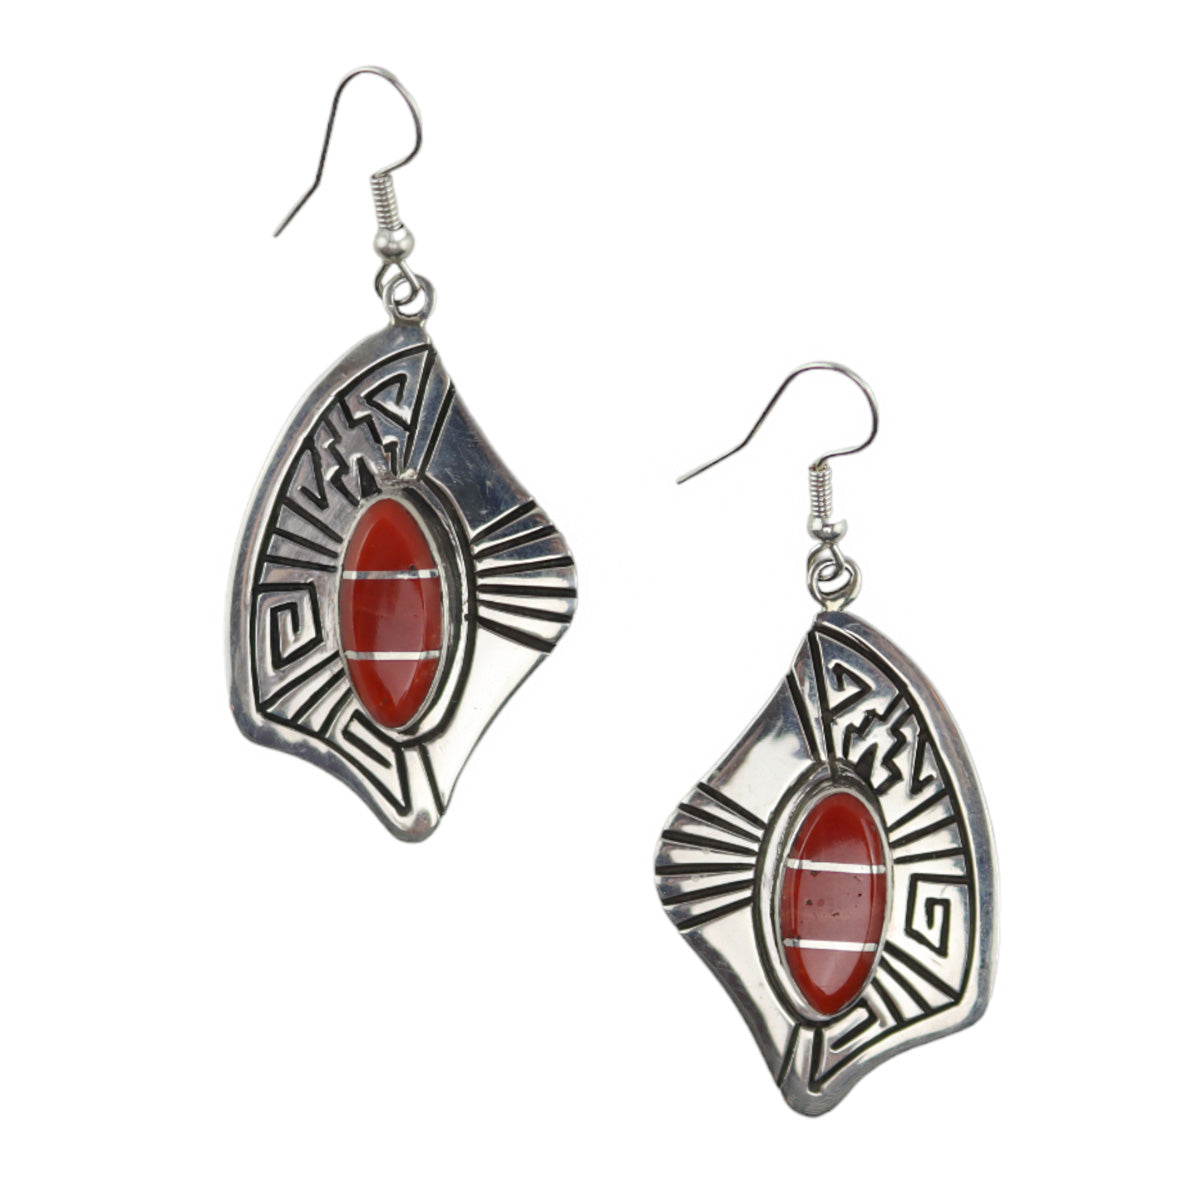 Abraham Begay - Navajo - Contemporary Coral Inlay and Sterling Silver Overlay Hook Earrings, 3.25" x 1" (J16077)